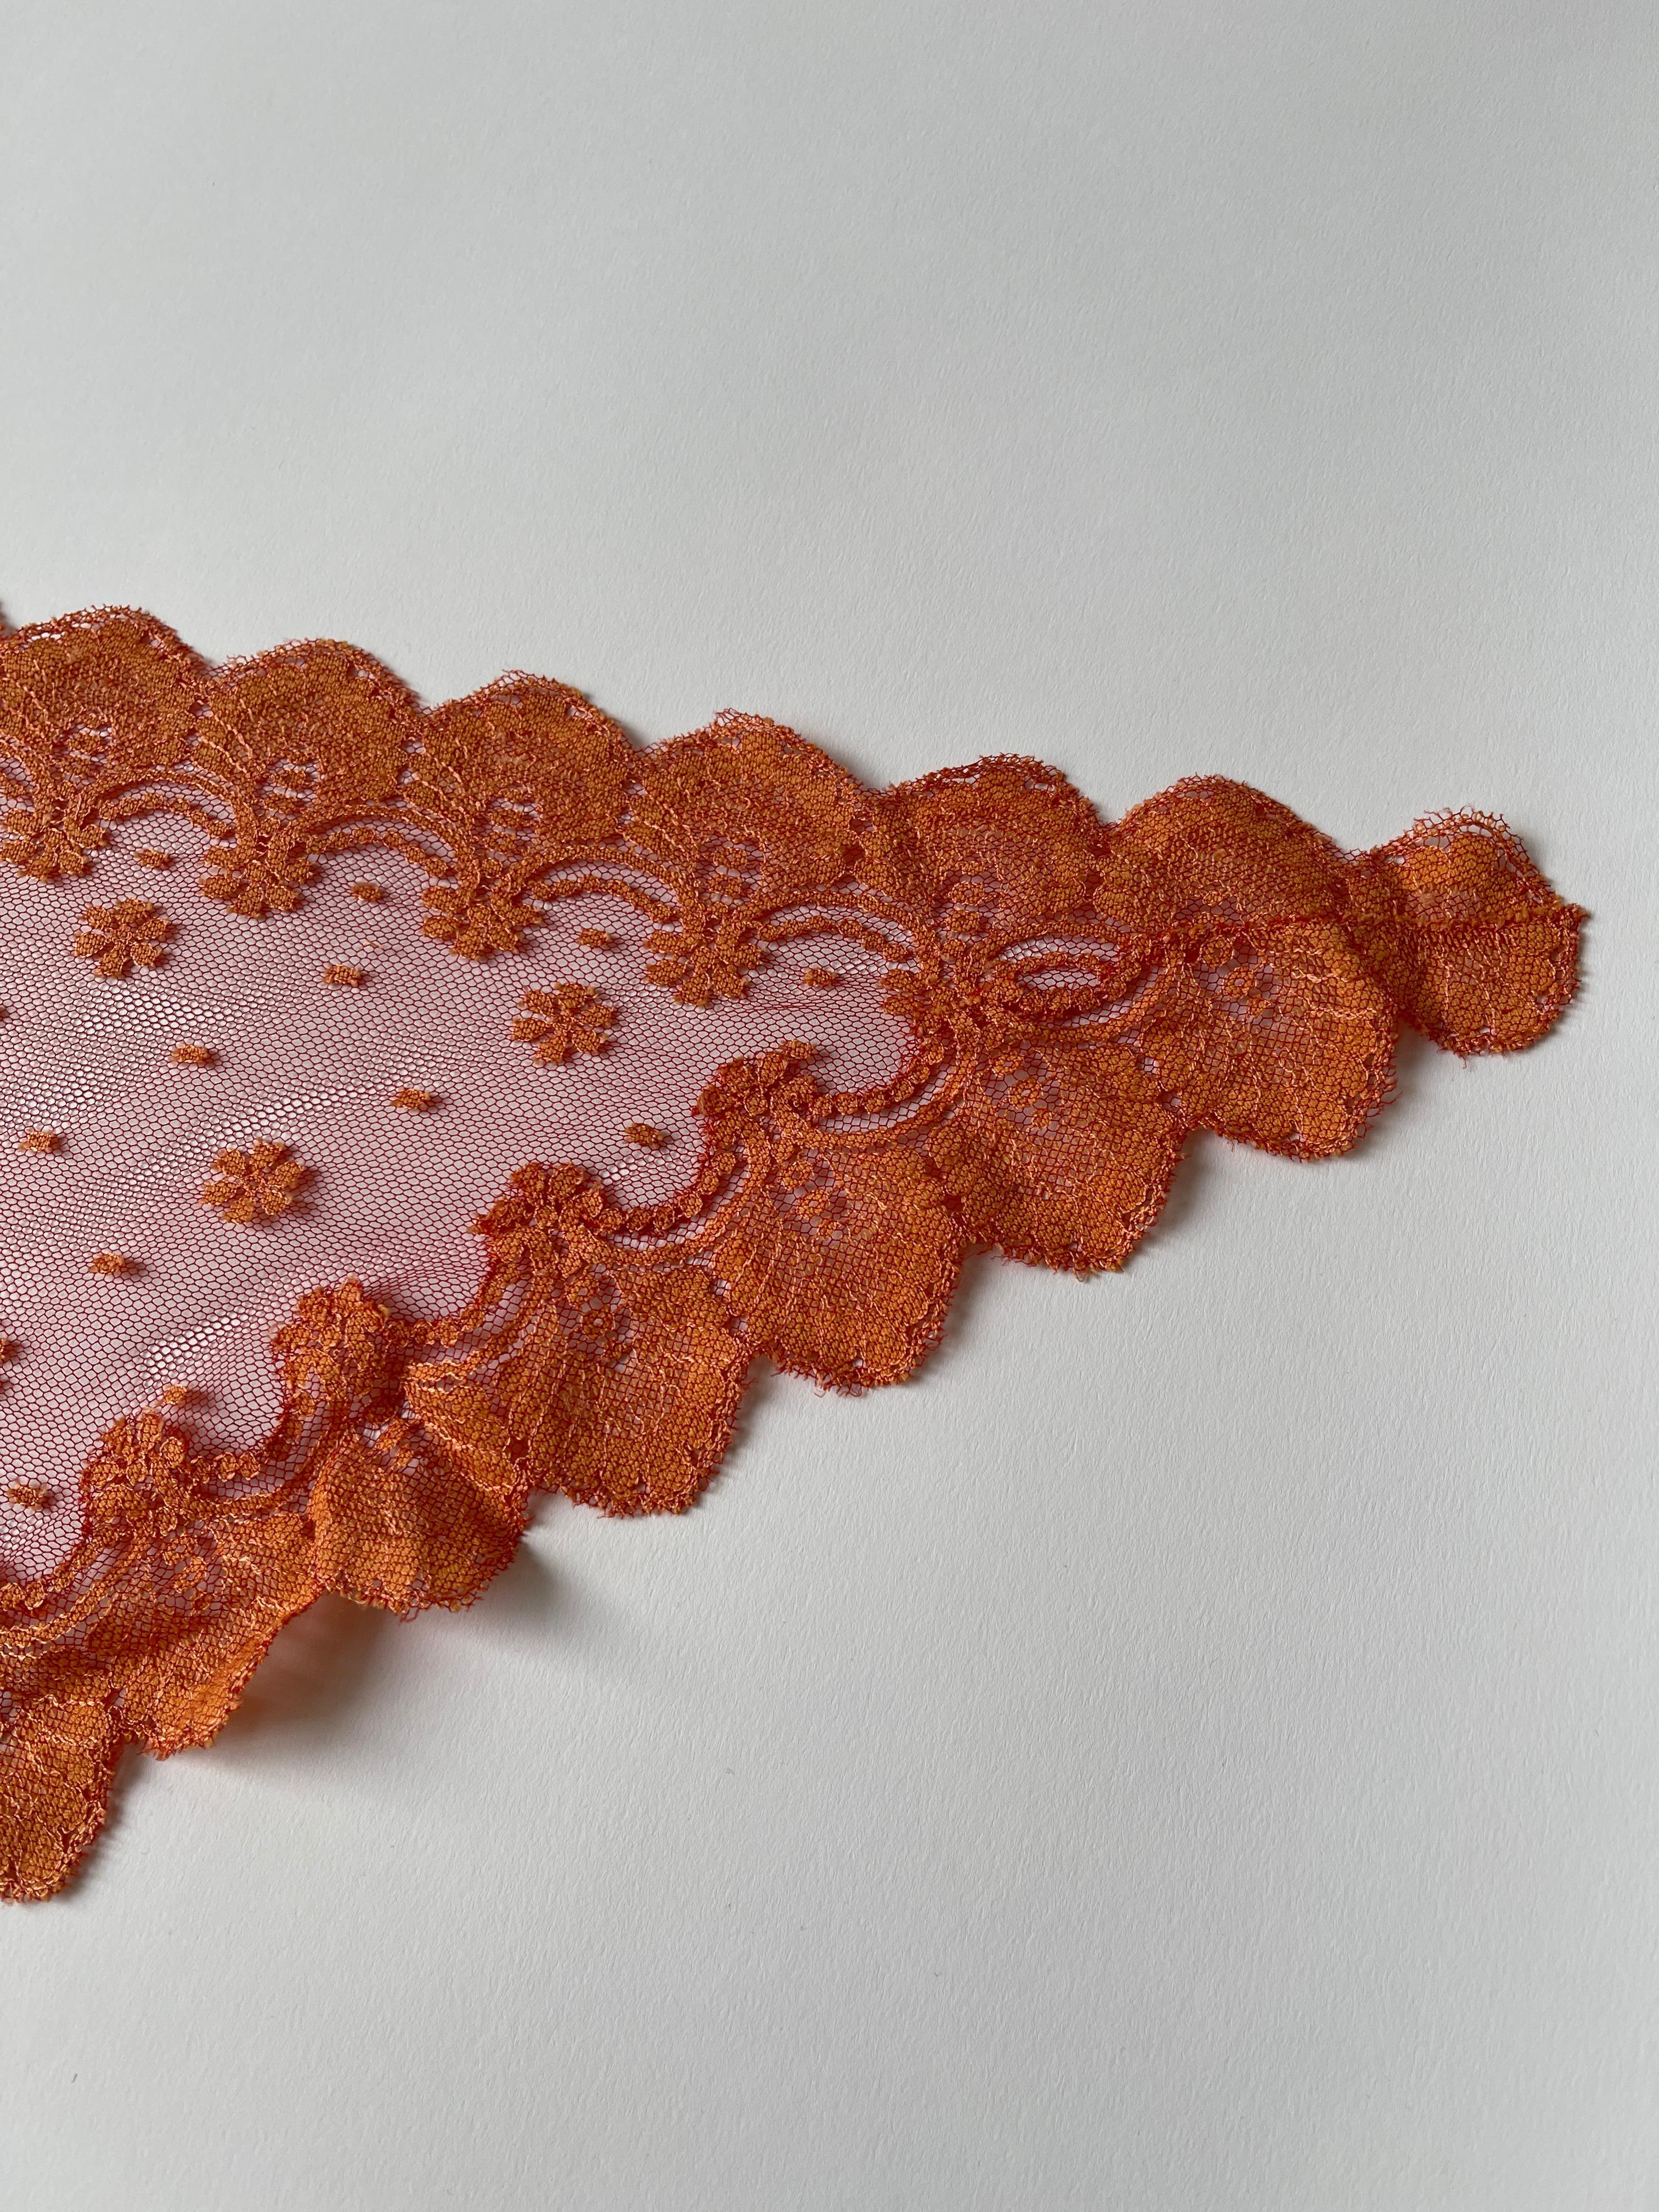 Women's or Men's Early 2000's Christian Dior by John Galliano Scarf Lace Orange Mantilla